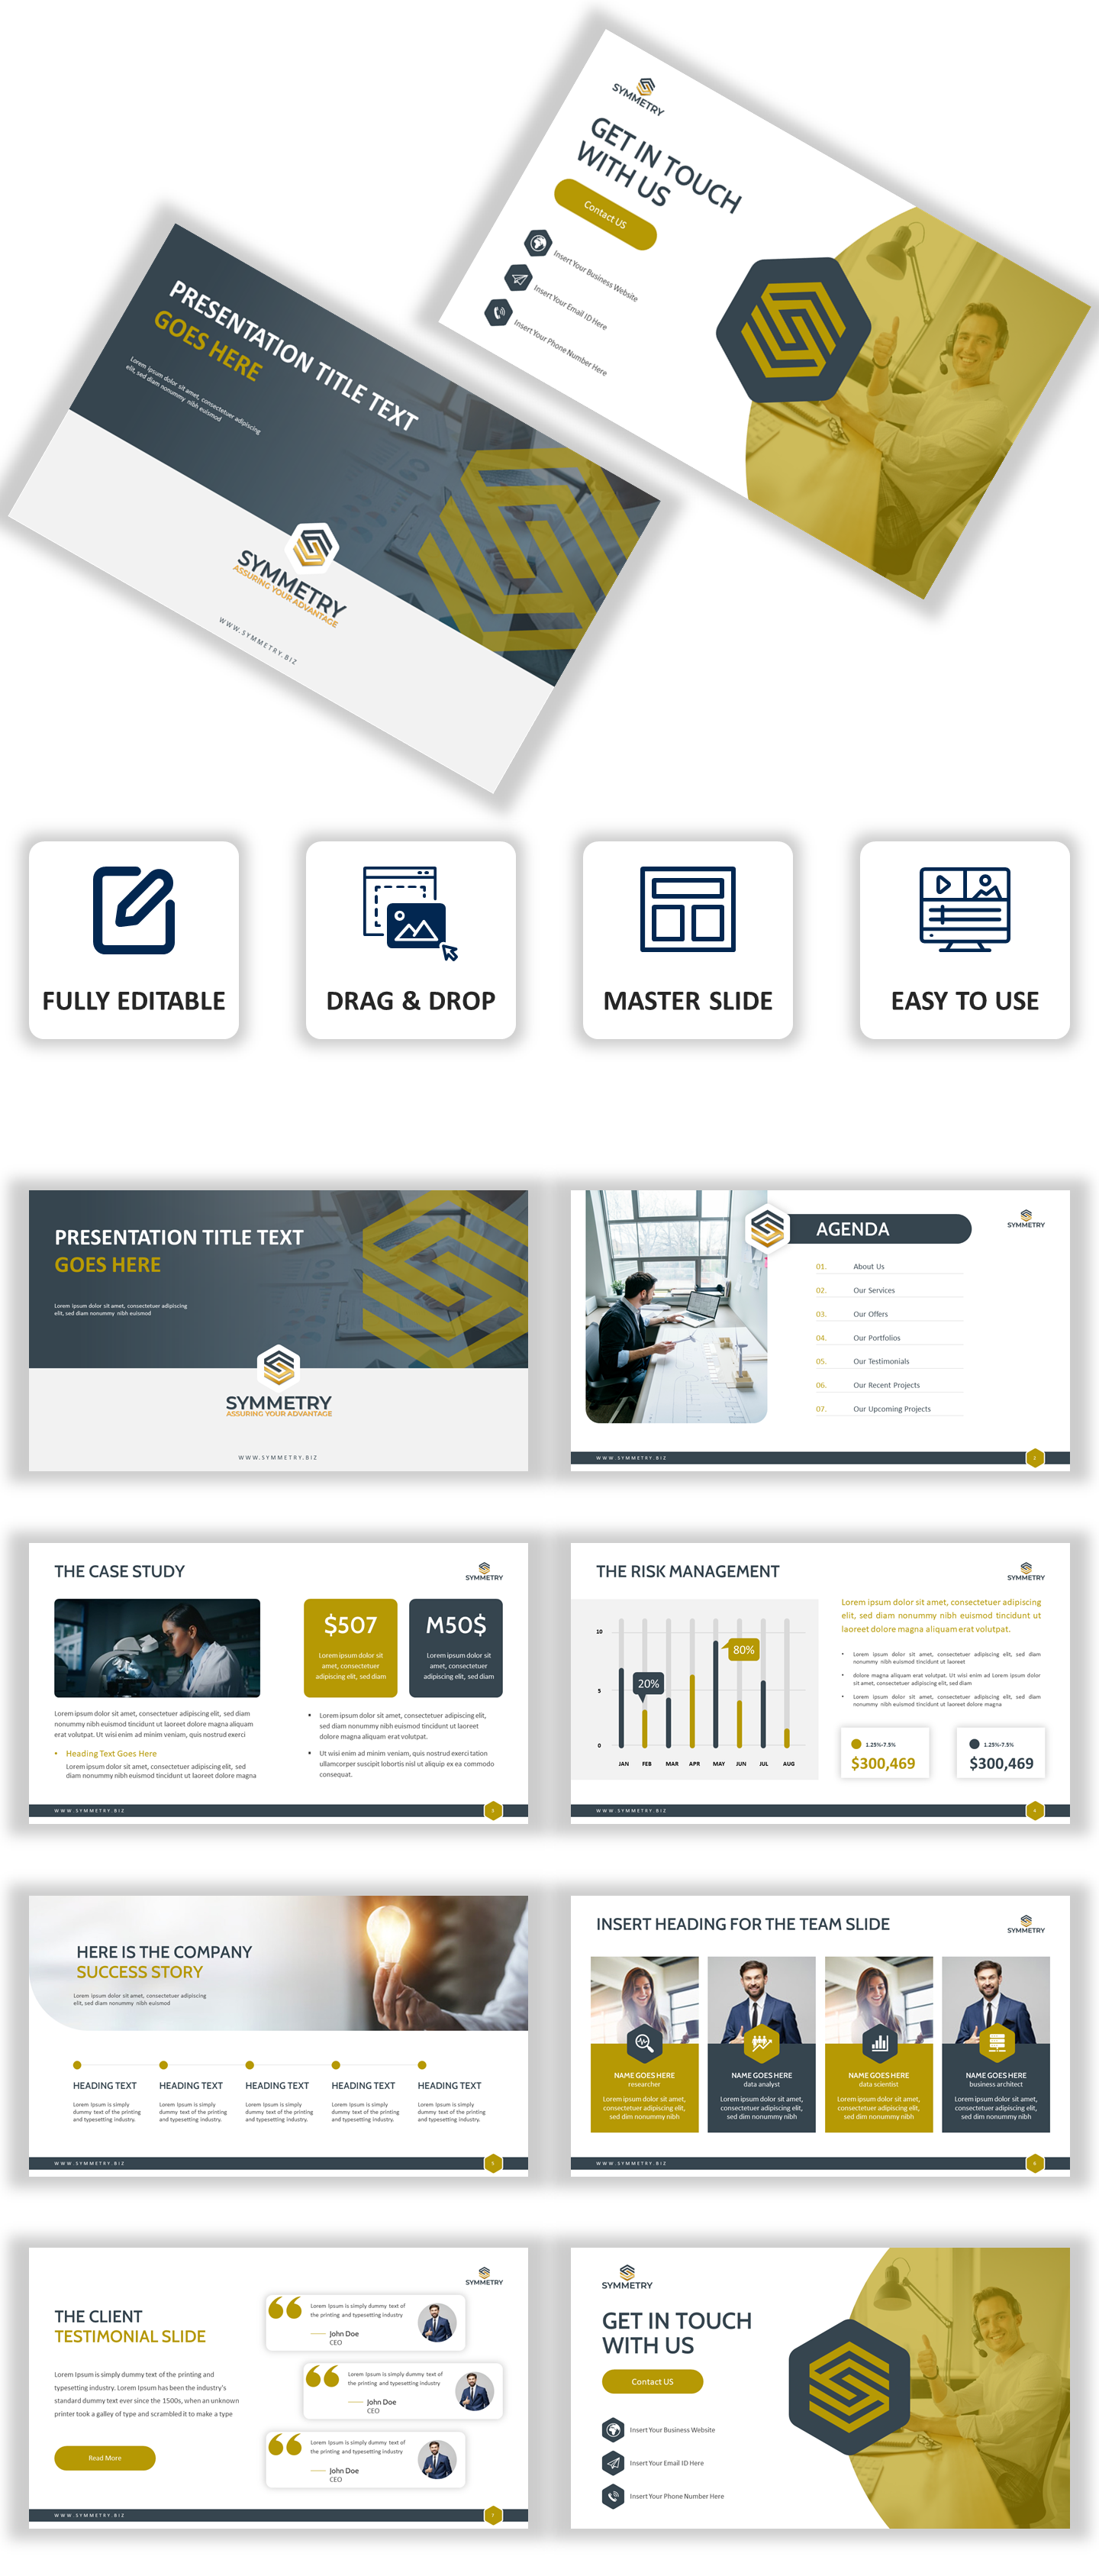 PowerPoint template for a technology consultant company